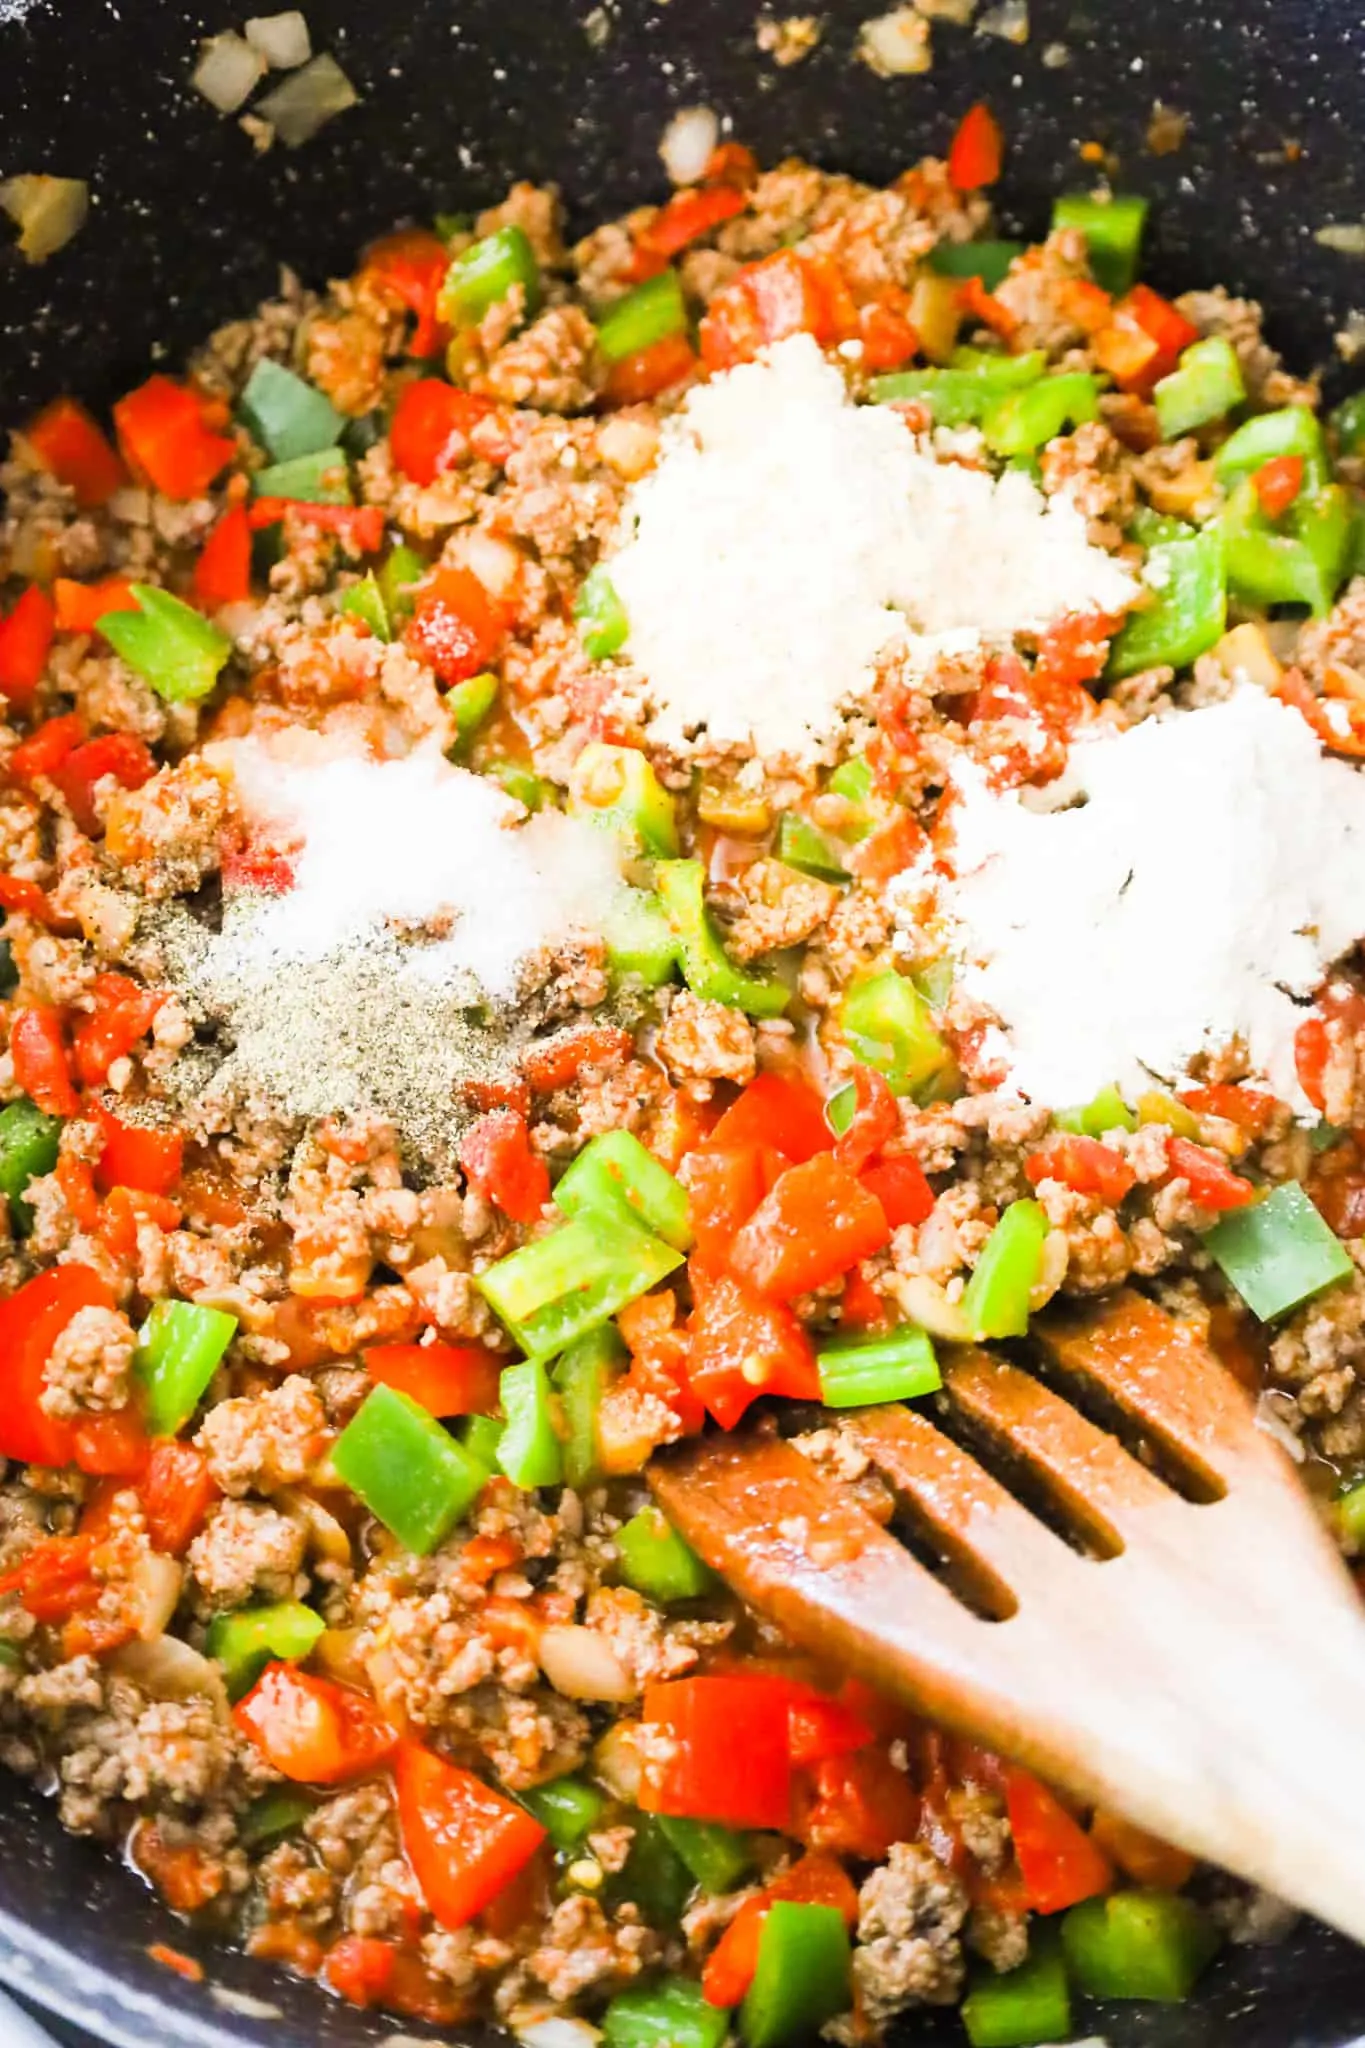 spices on top of ground beef and peppers mixture in a saute pan